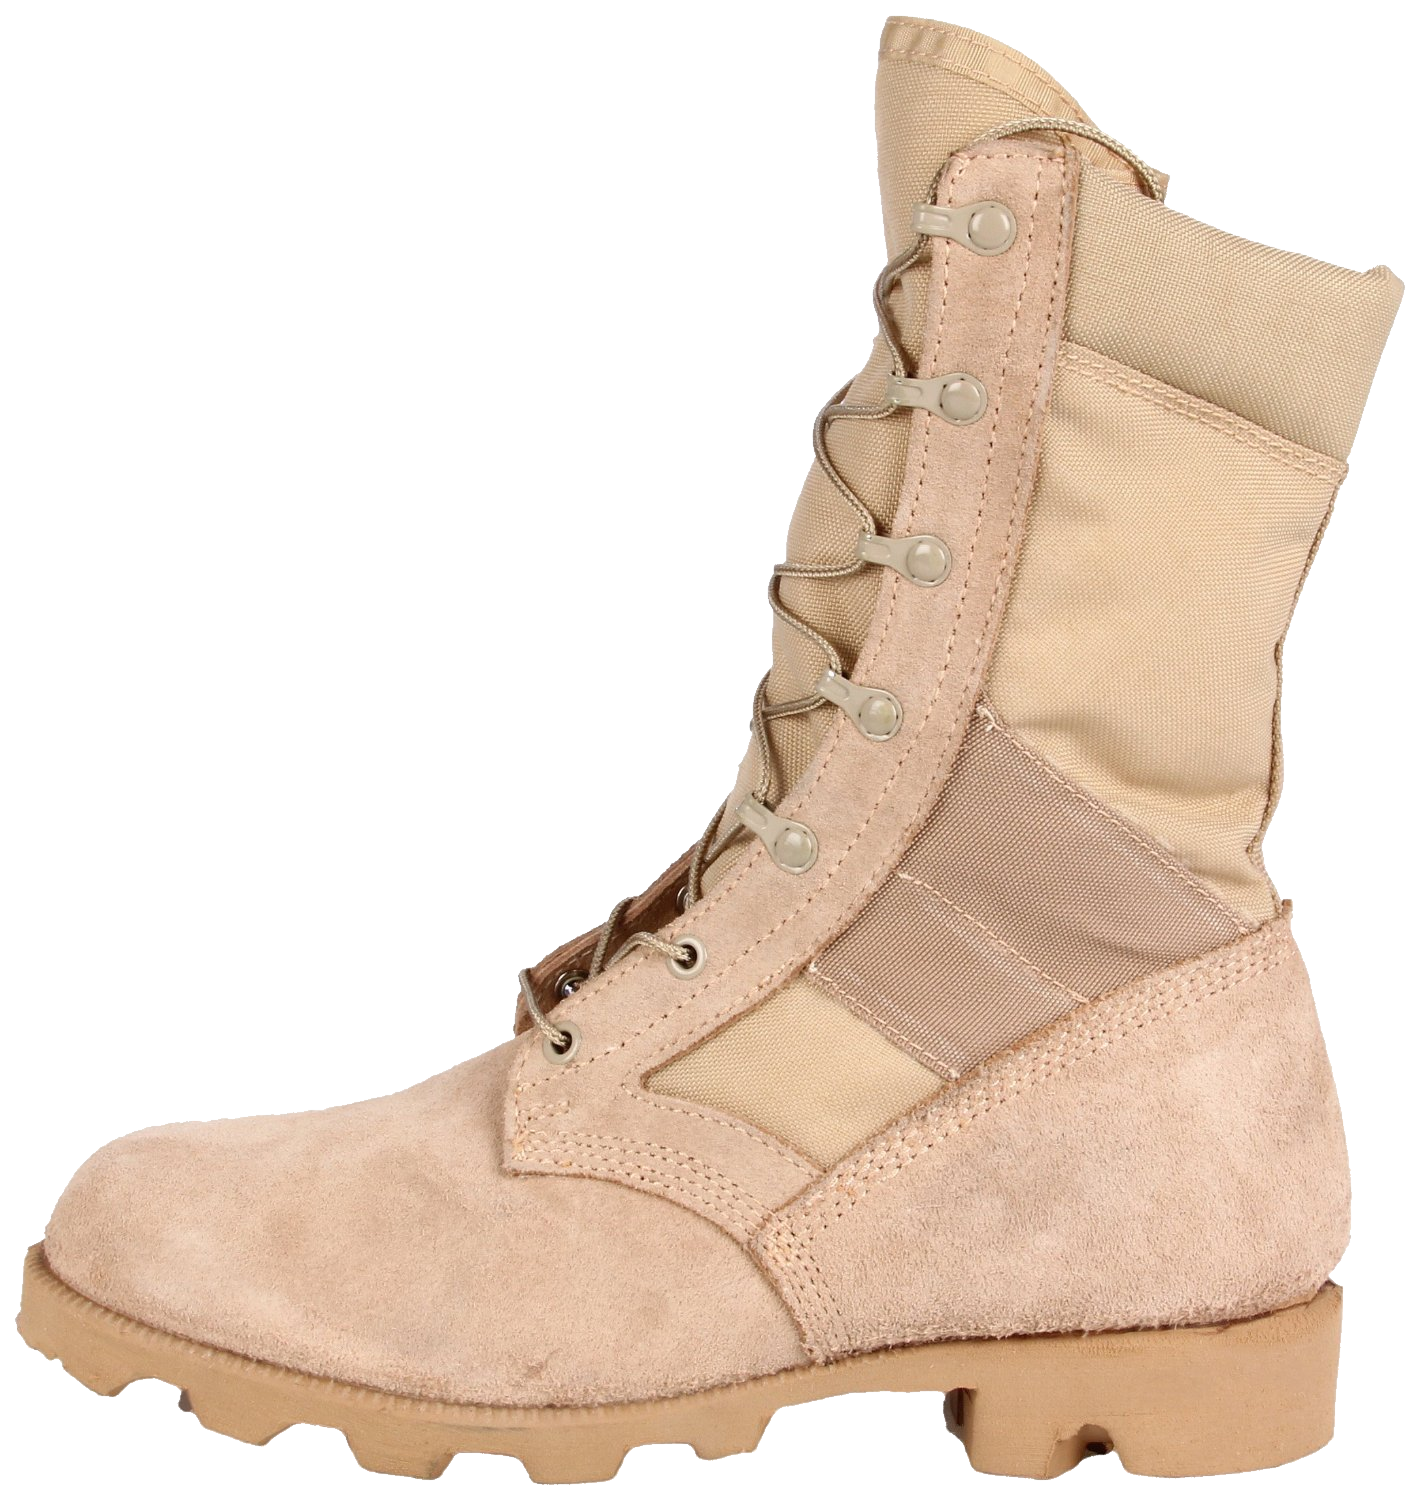 Boots PNG Photo Image